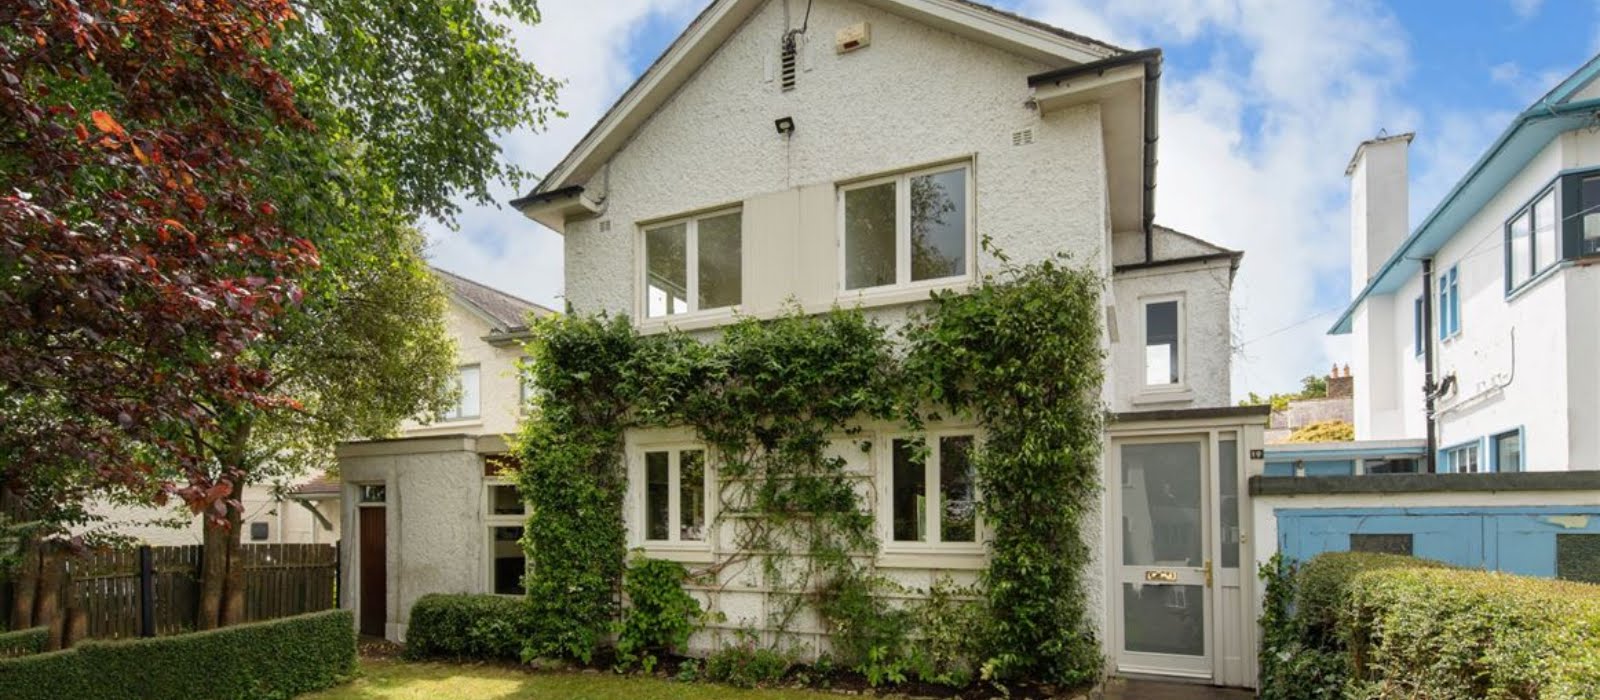 This five-bedroom family home in Blackrock is on the market for €1,325,000